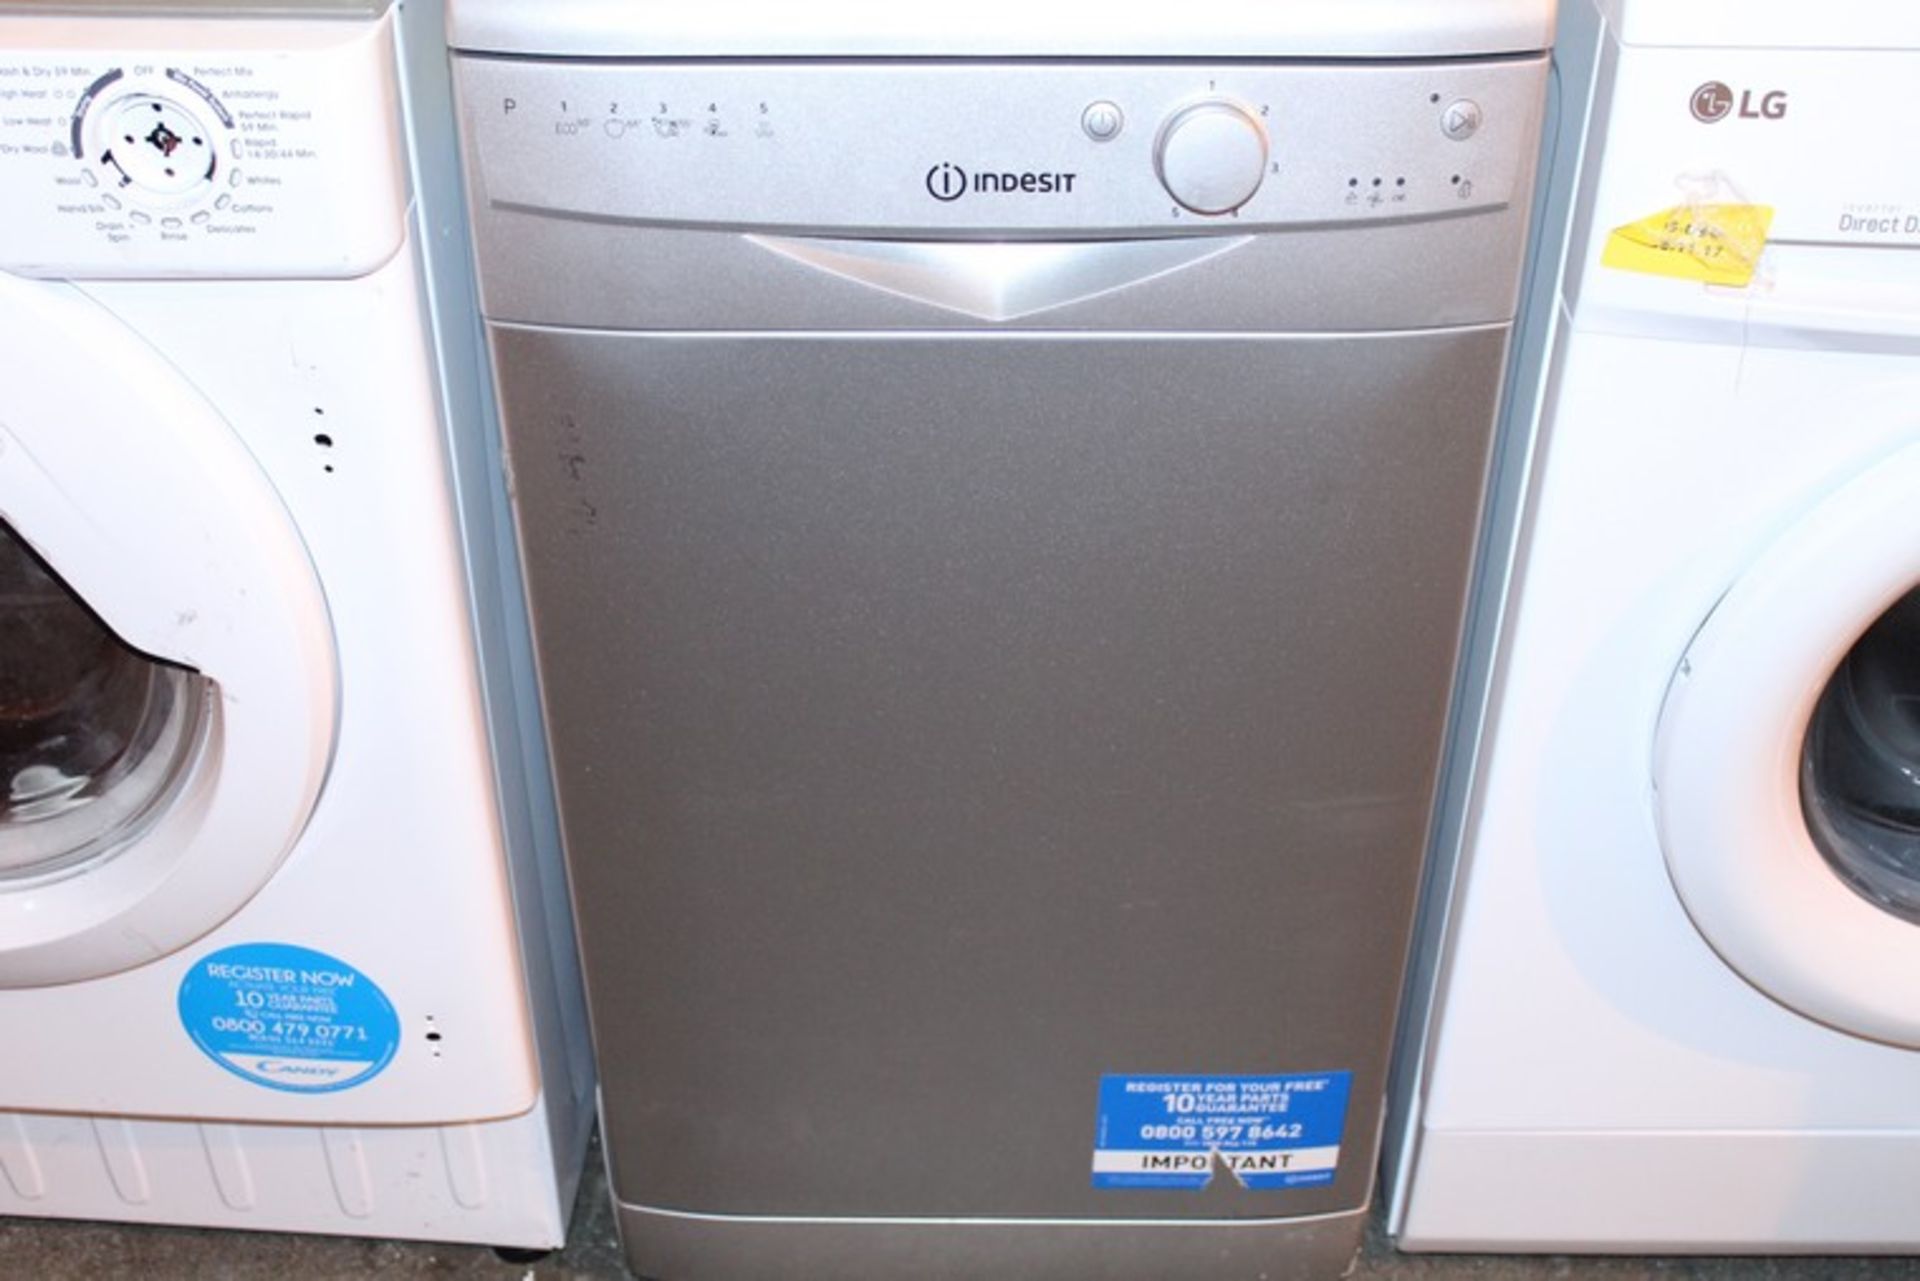 1 x INDESIT DSR15B1S DISHWASHER IN SILVER (16.11.16) (8WX001829) *PLEASE NOTE THAT THE BID PRICE